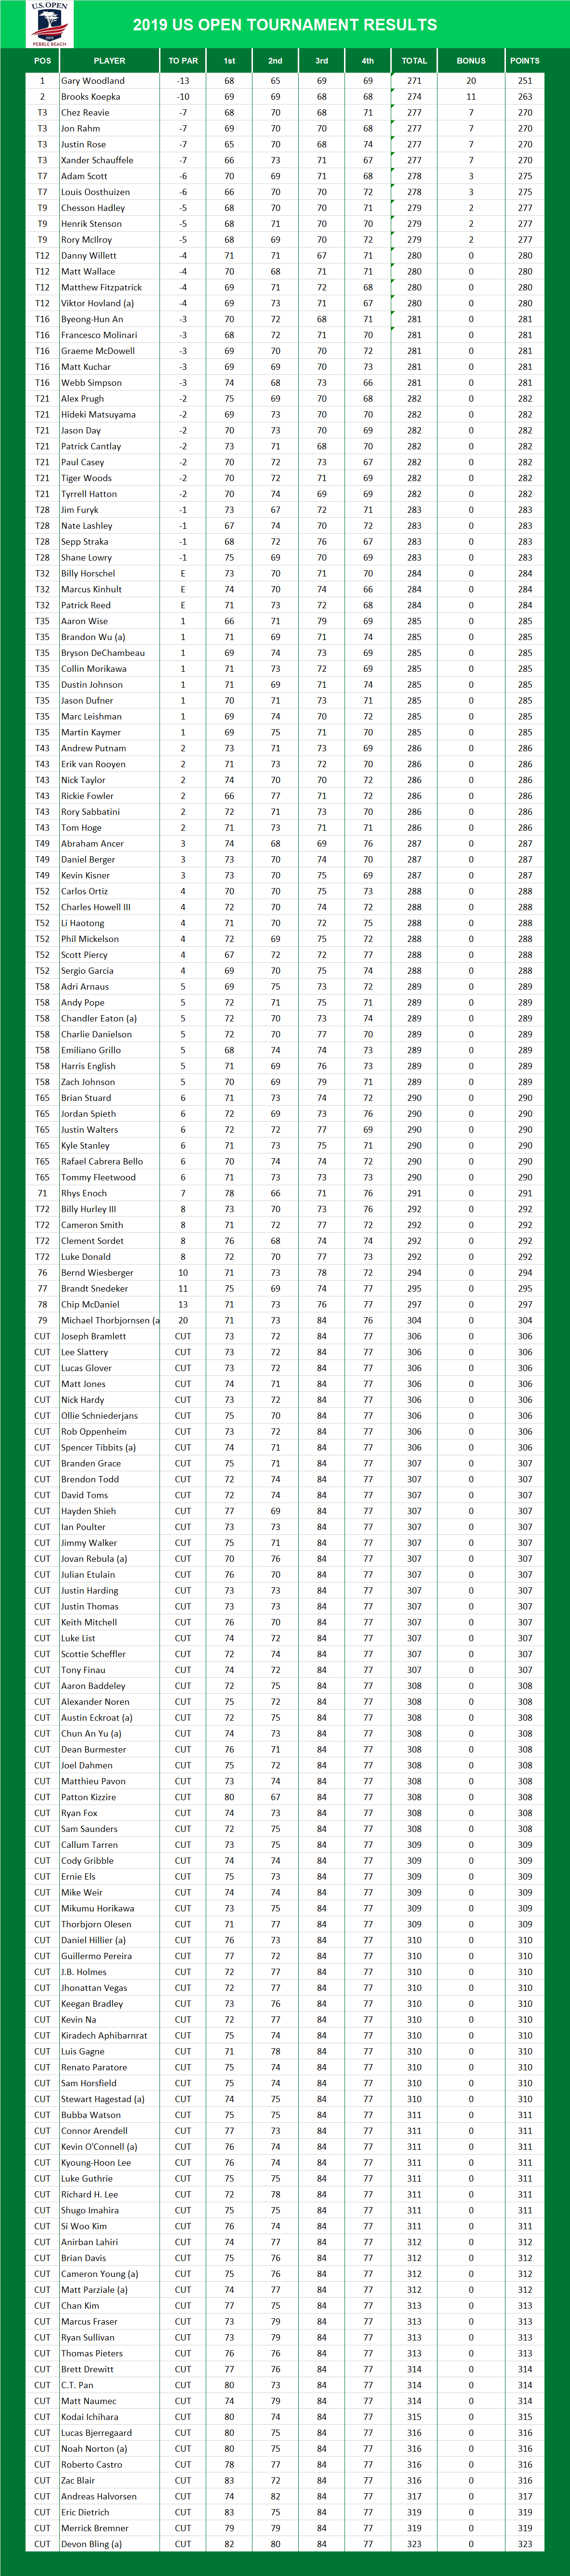 2019 US Open PGA Results